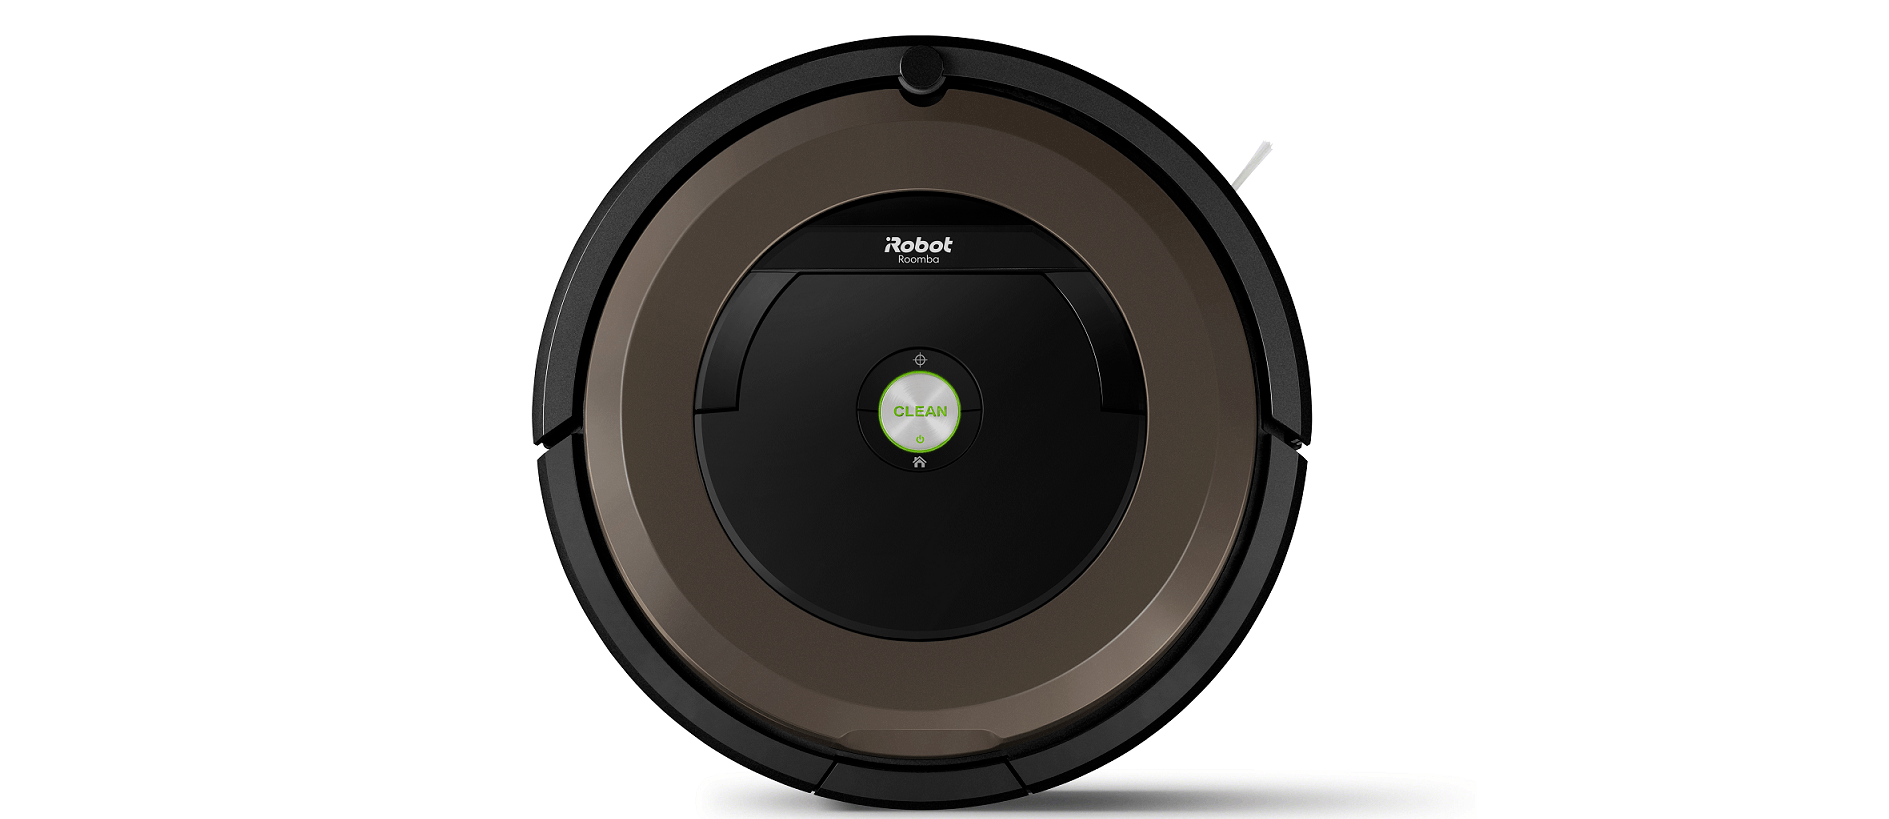 iRobot Roomba 890 Gray/Black Robotic Cleaner with charger No box #890ru 